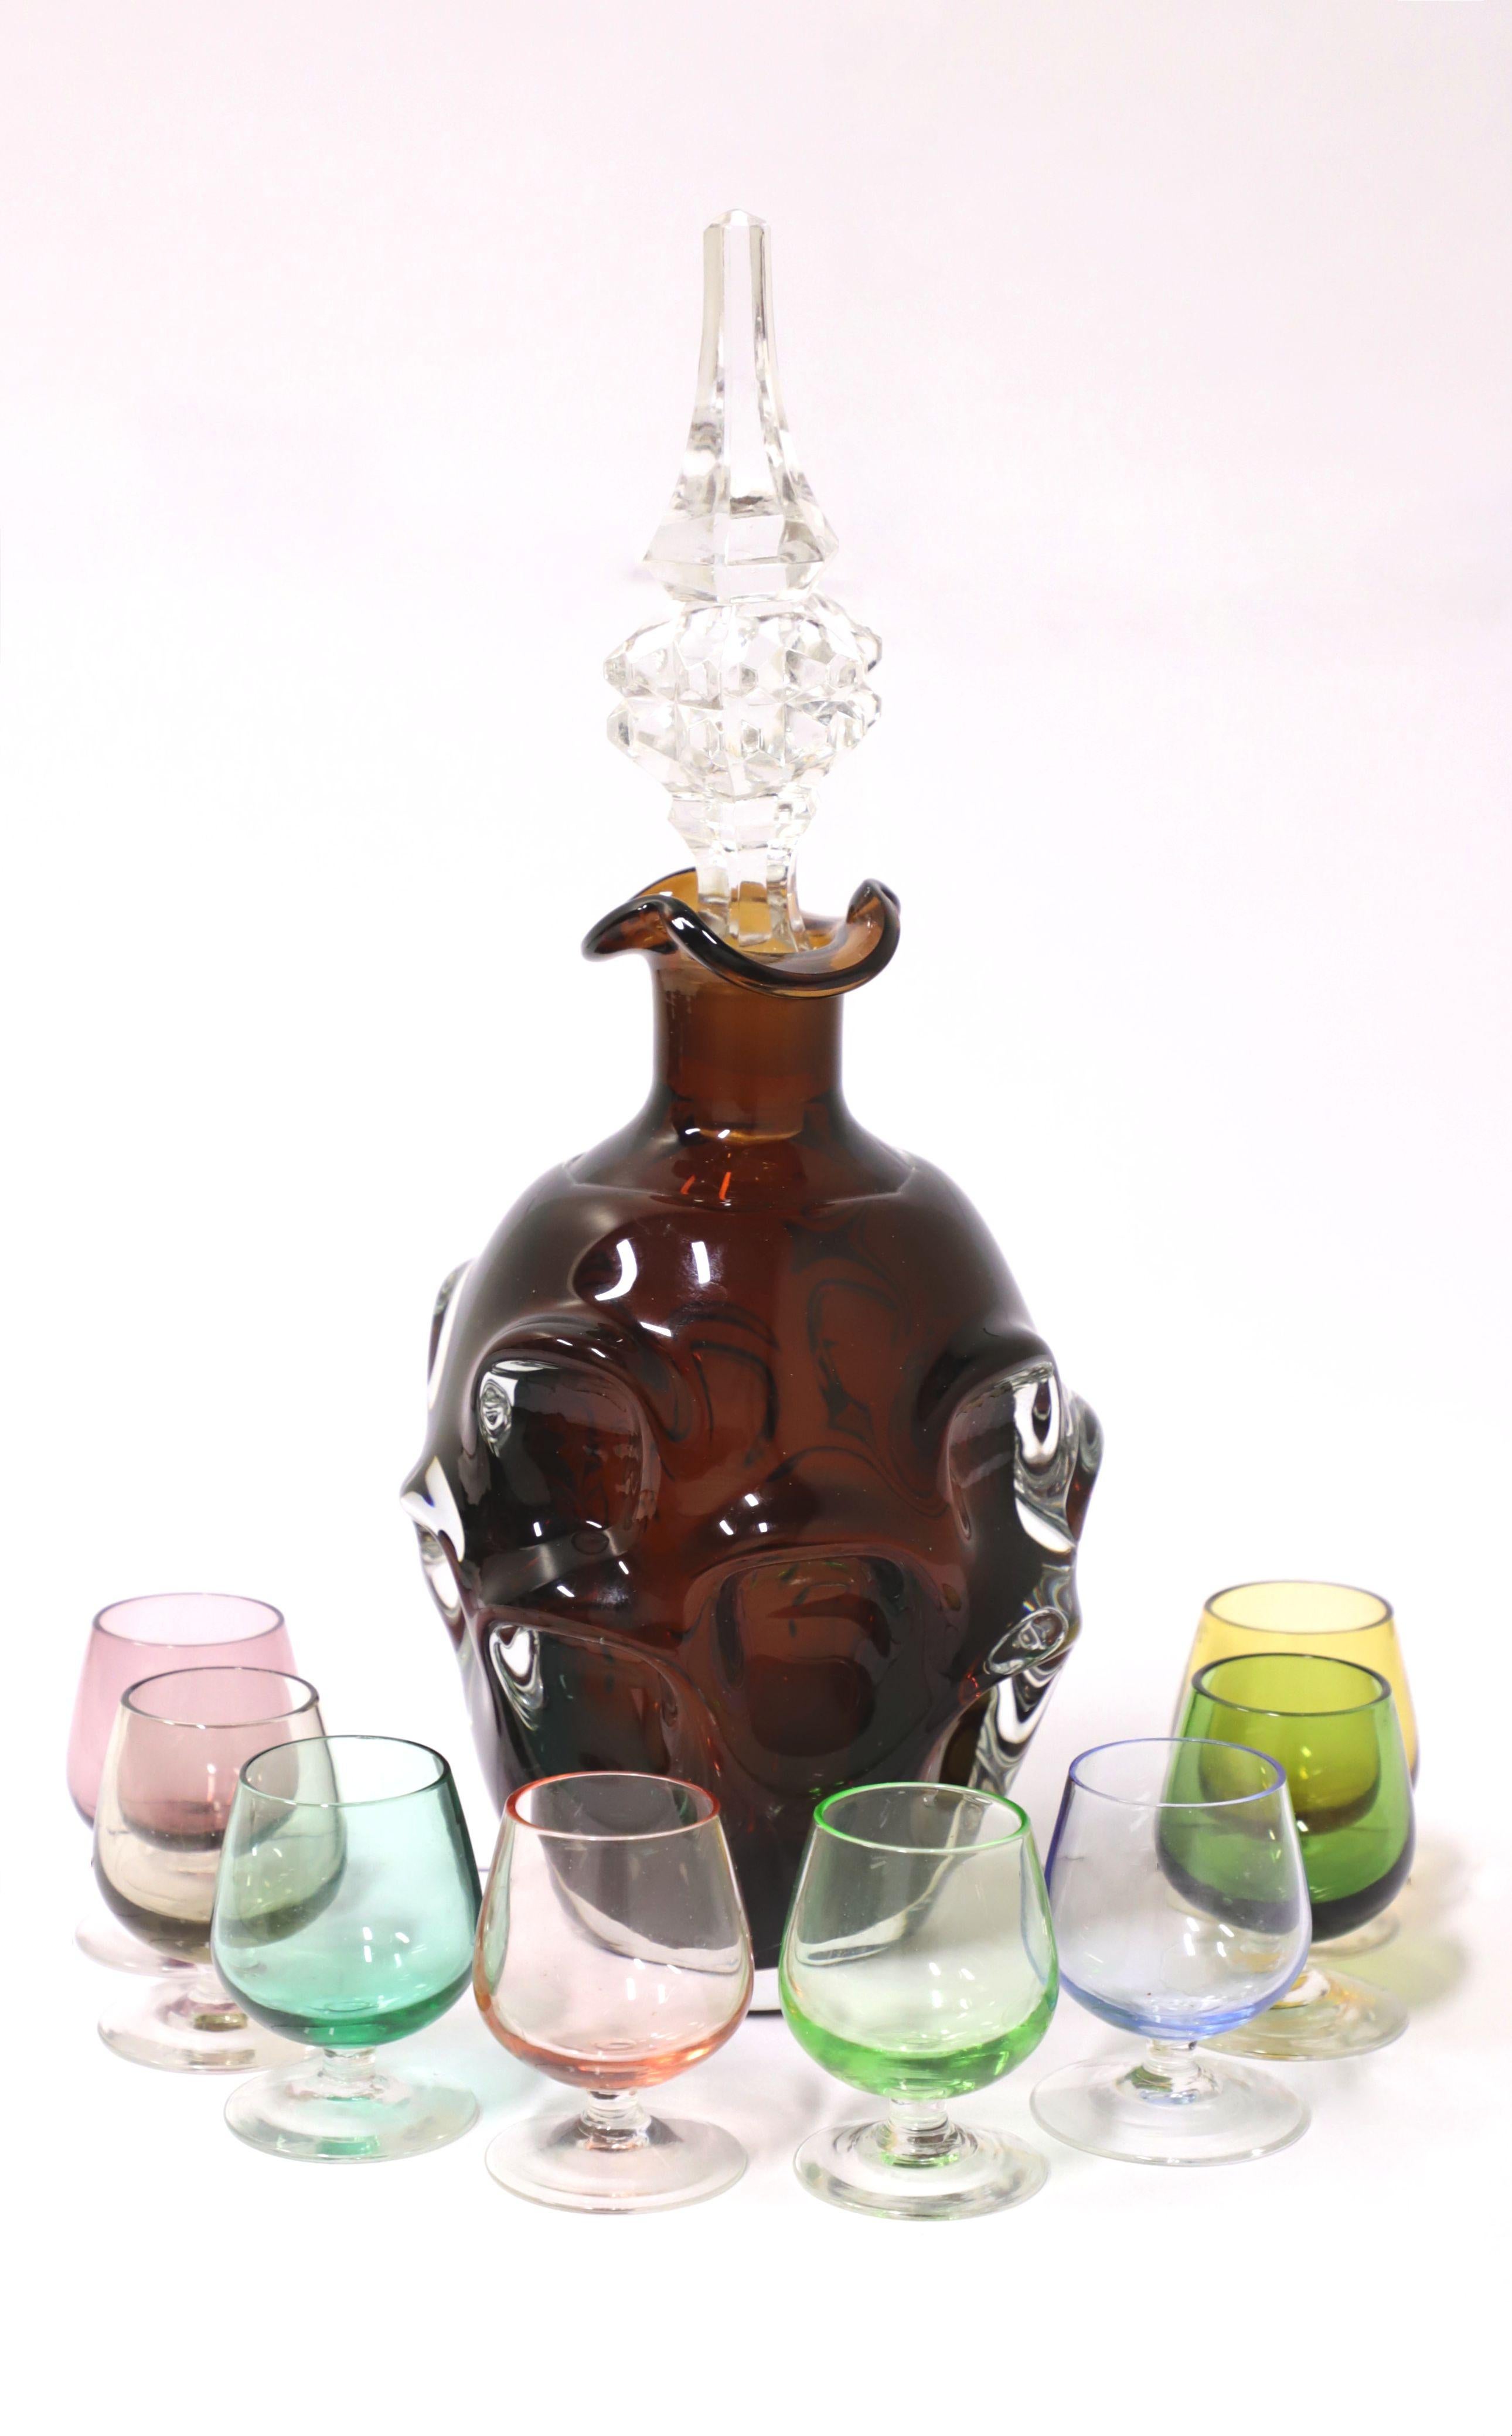 Mid 20th Century Decanter Set with Cordial Glasses - 9 Pieces For Sale 6